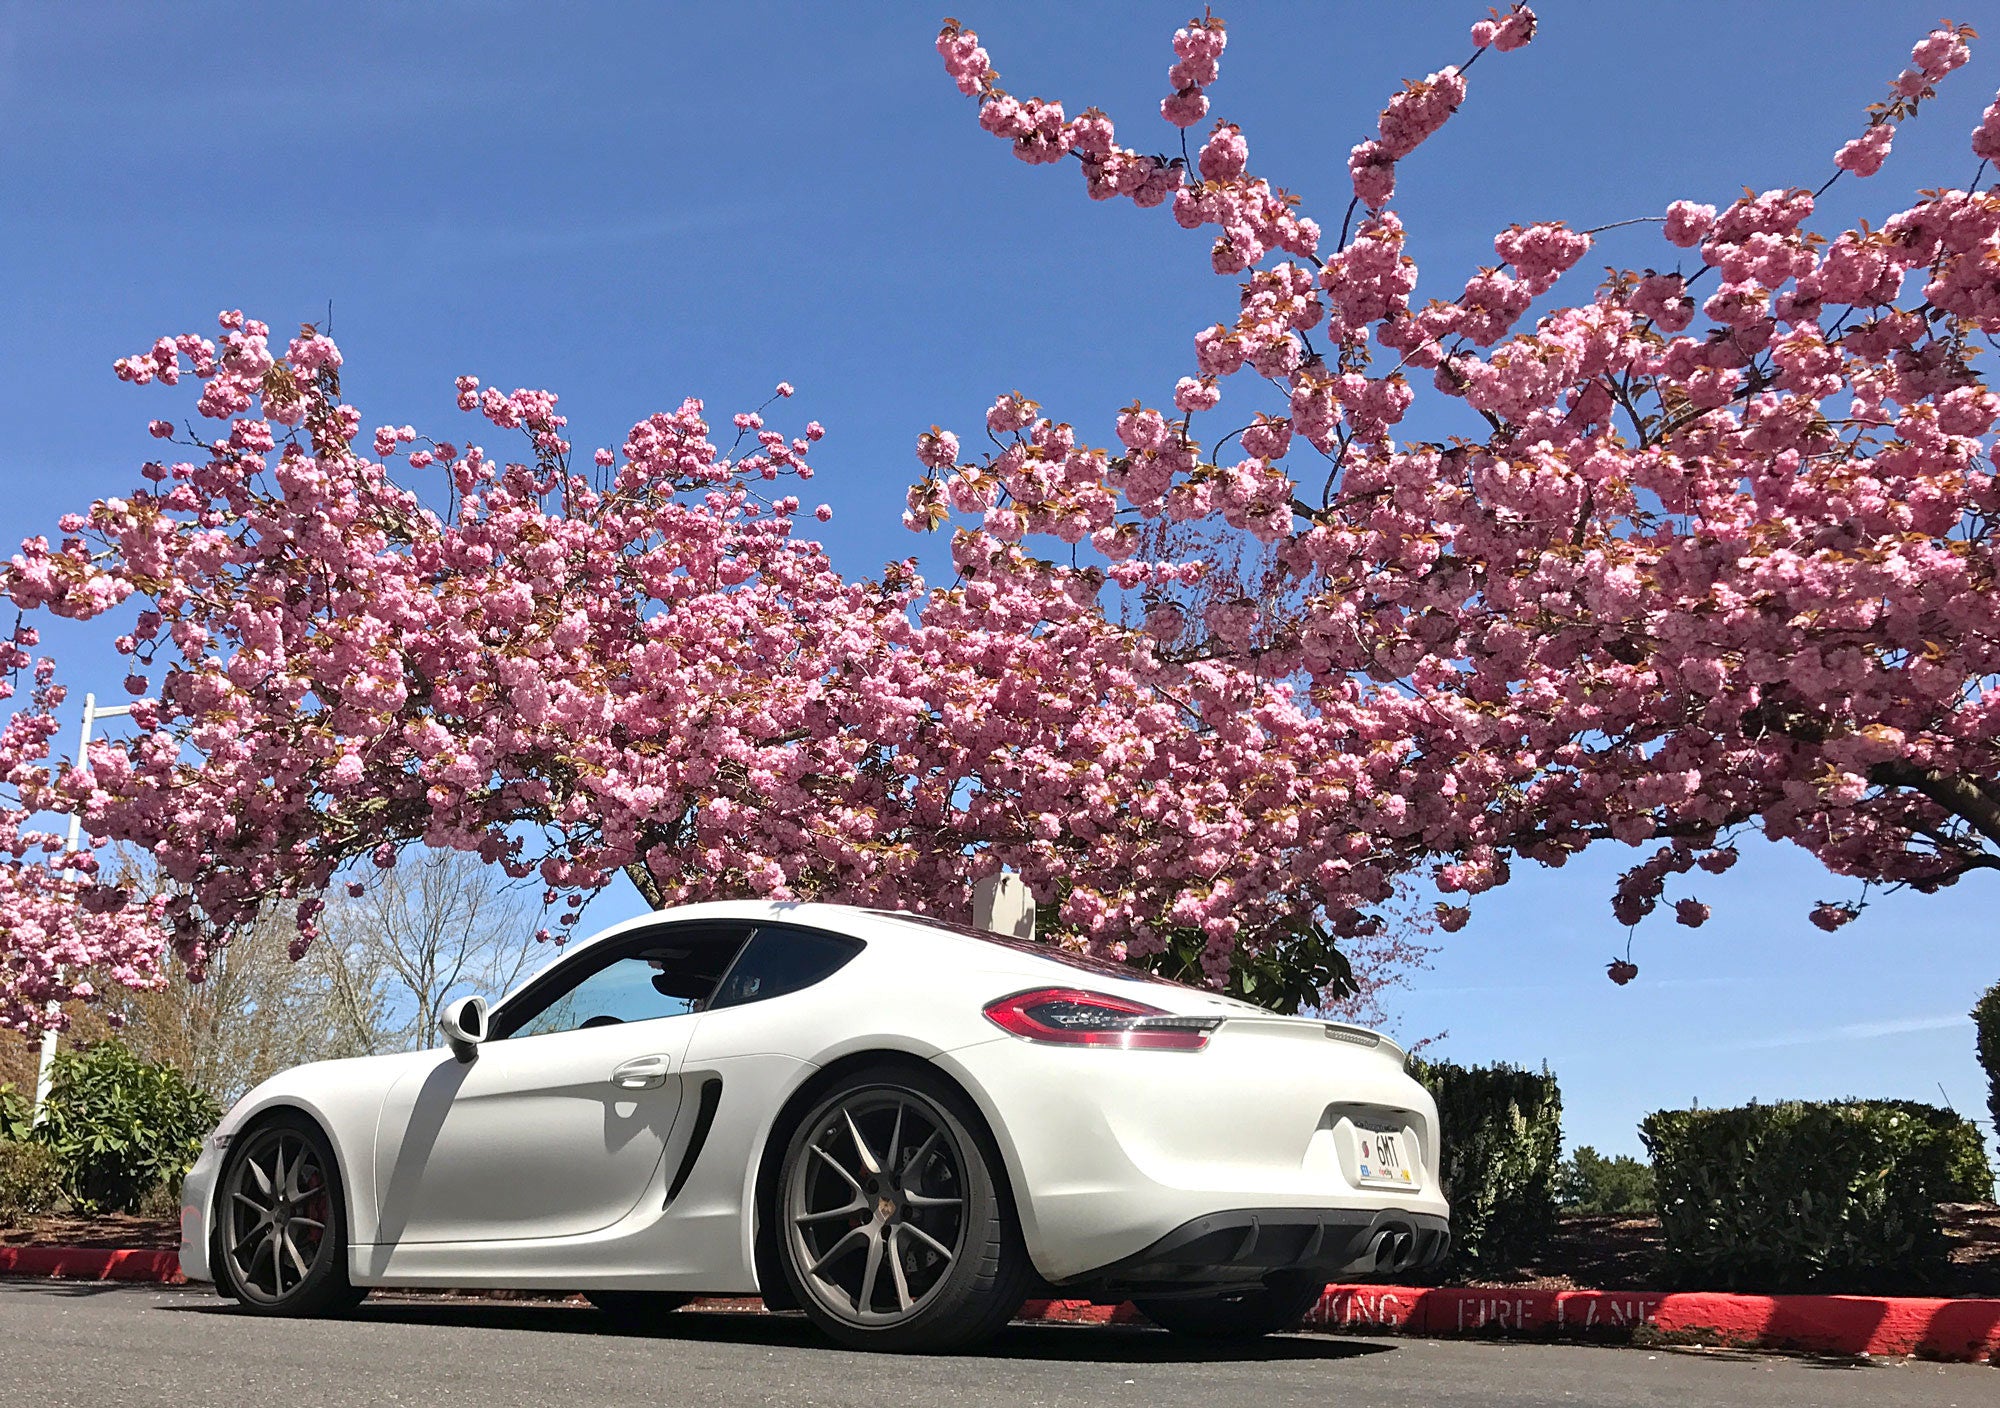 H&T Daily 981 Porsche Cayman S with Pink Magnolia Blossoms